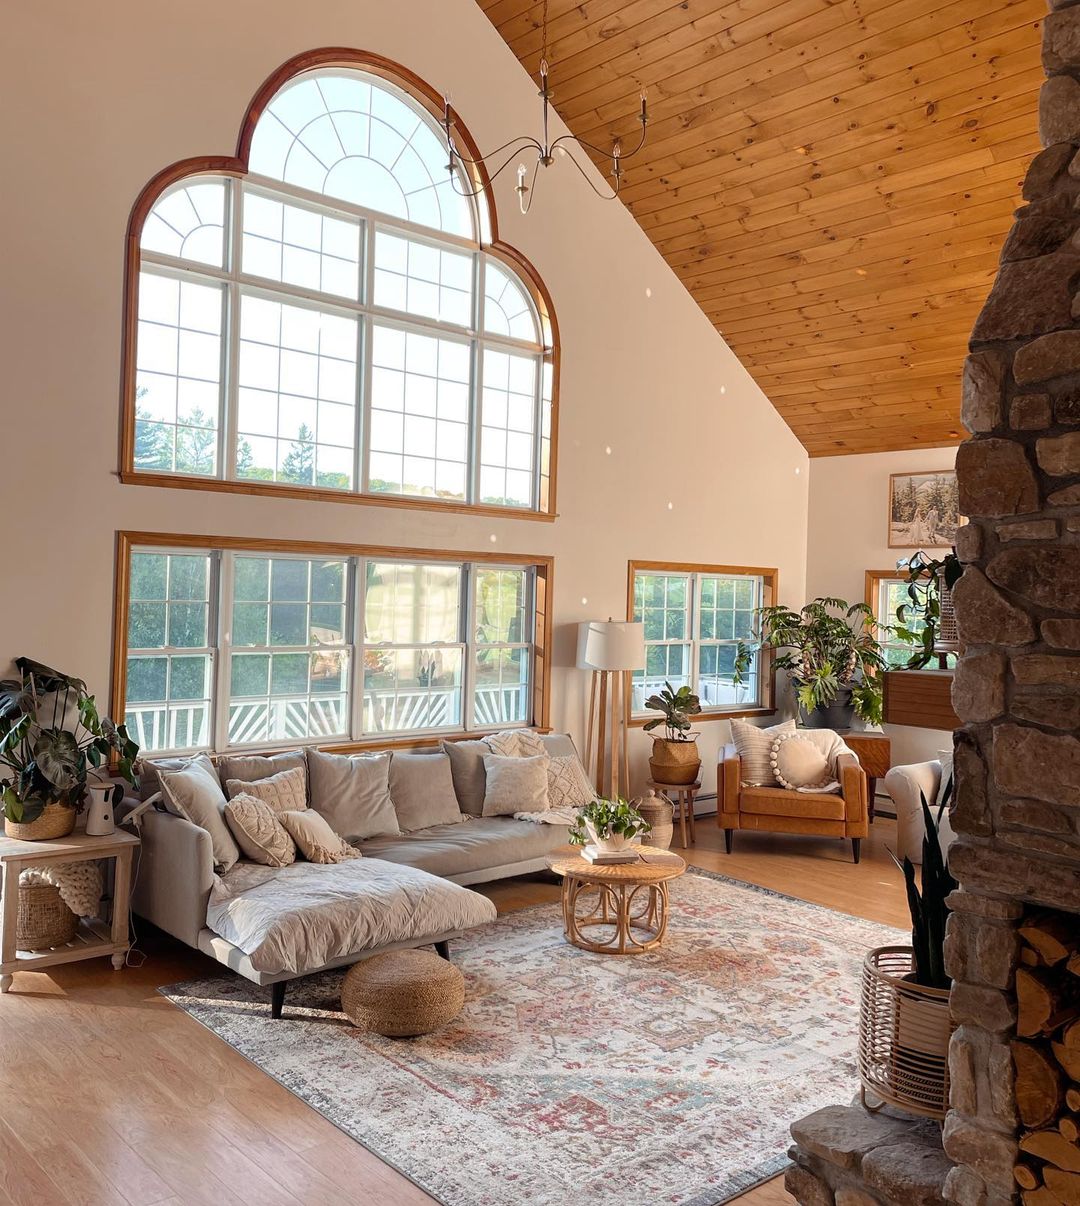 Living room with tongue and groove plank ceiling, wall of windows and stone fireplace